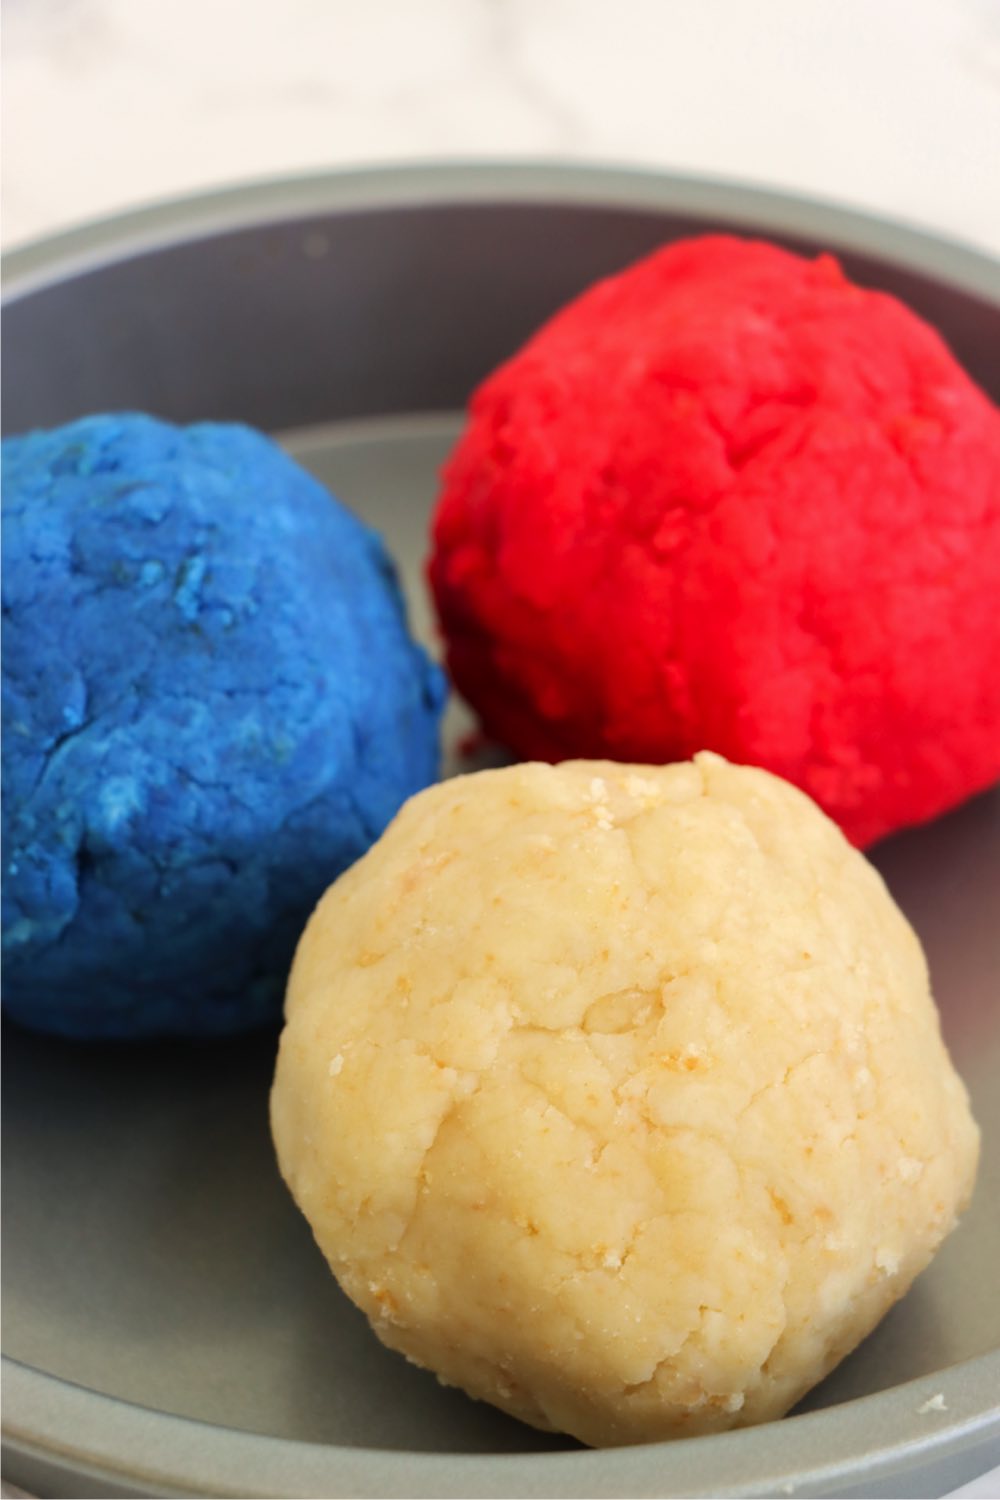 Red, white and blue balls of cake batter.